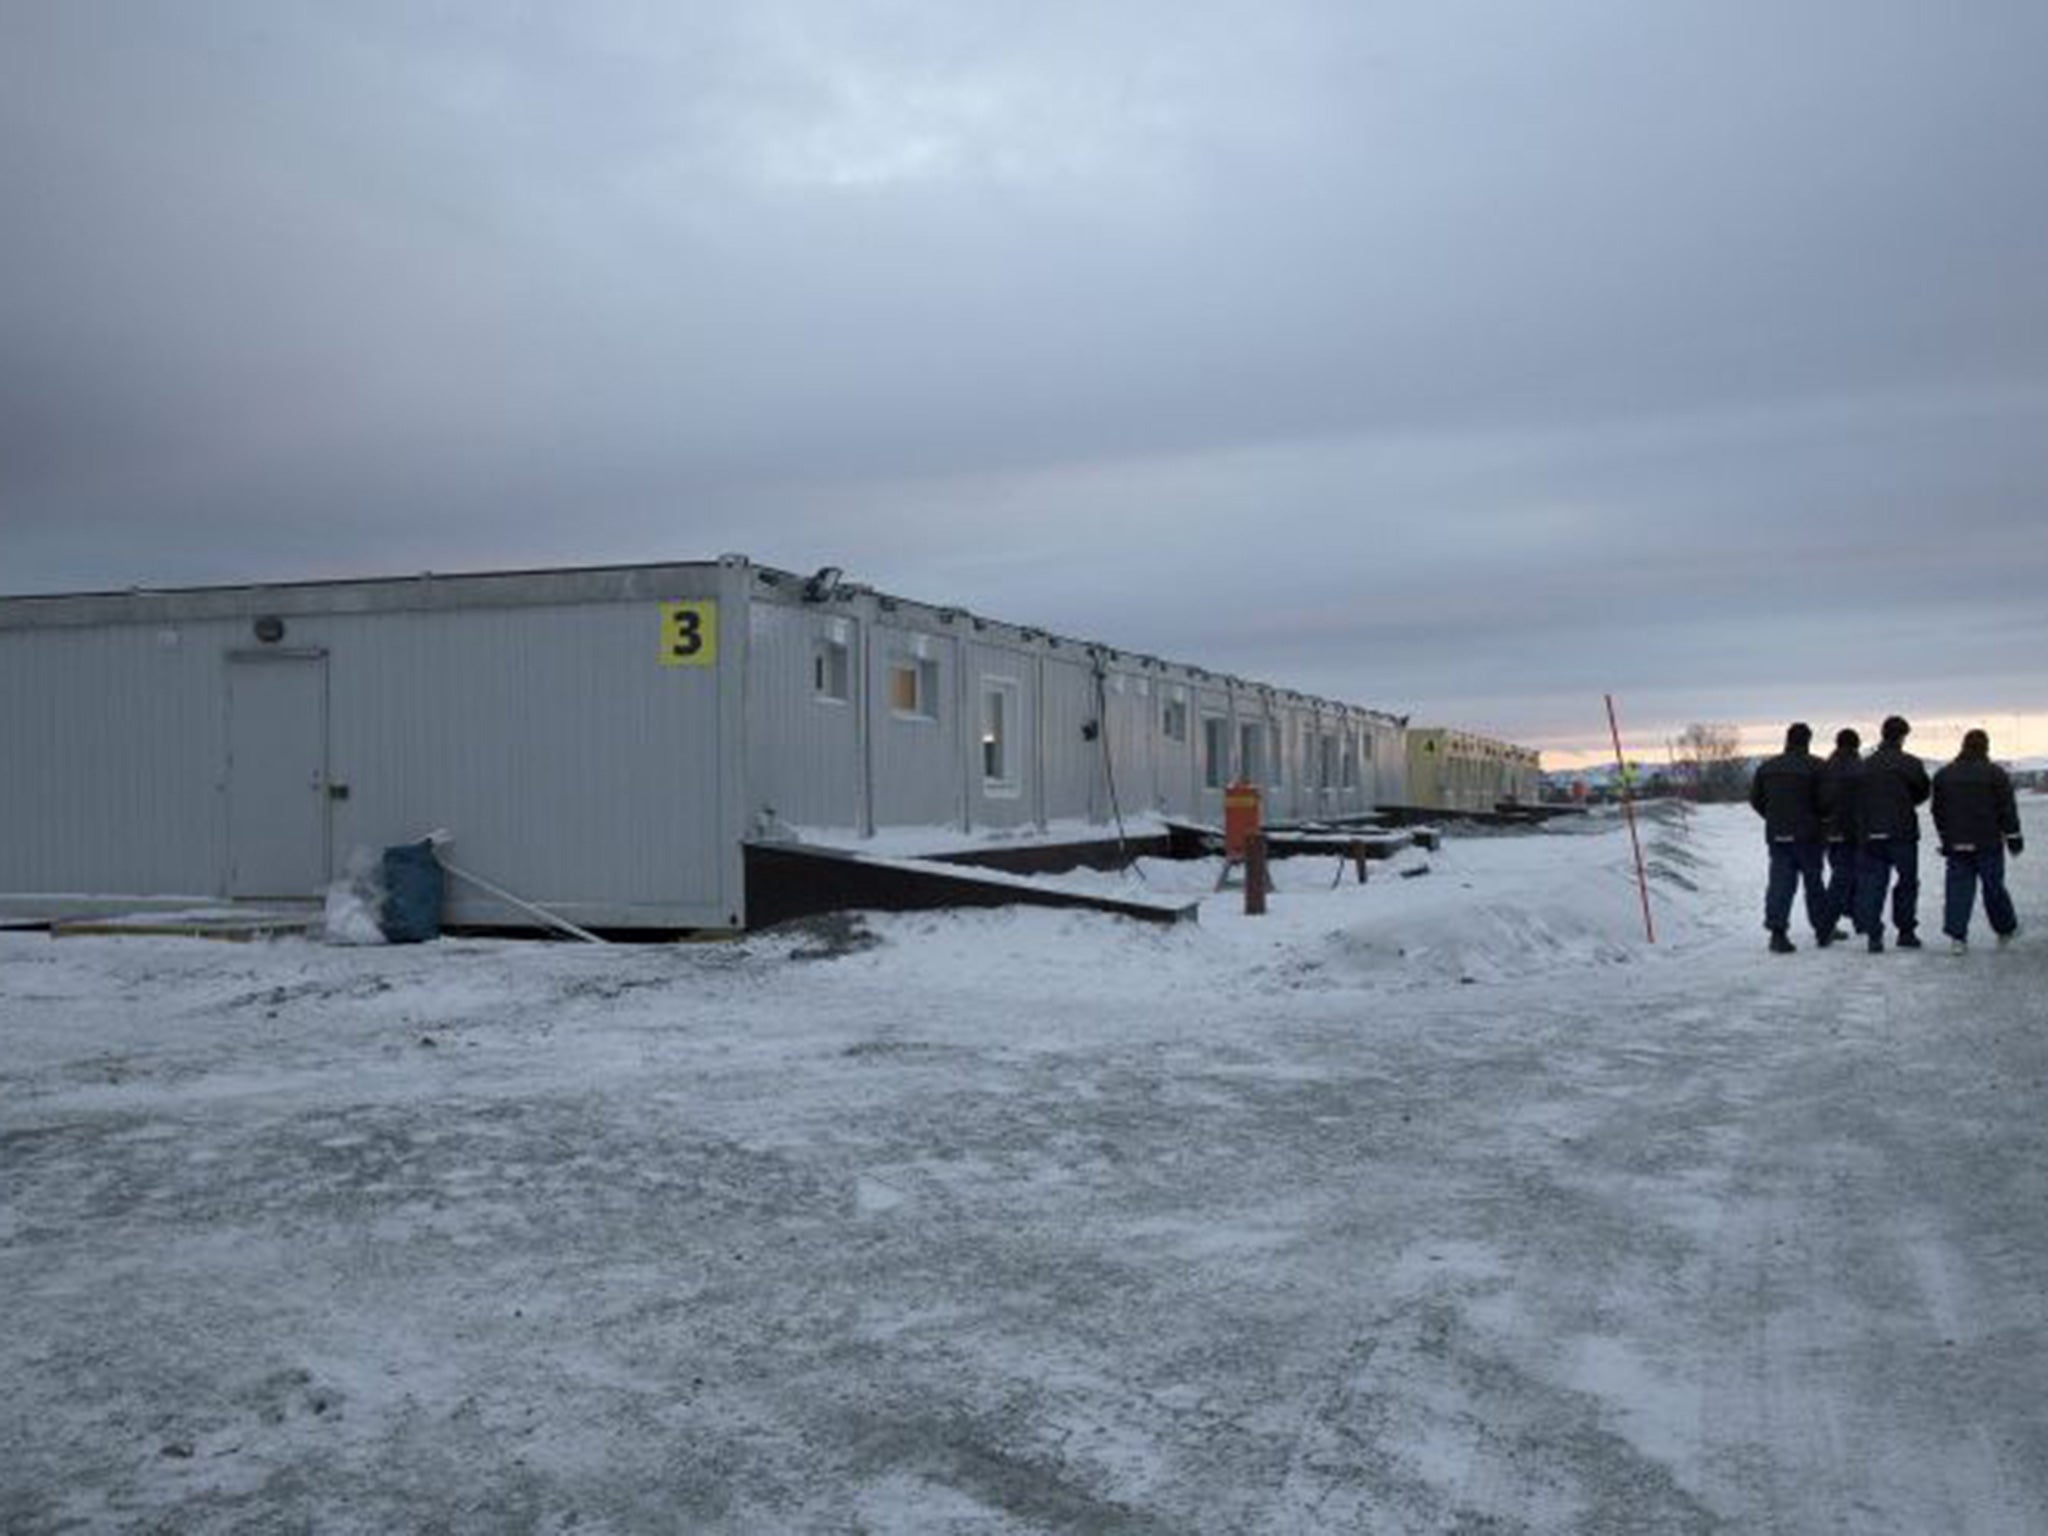 The new centre for refugees and migrants pictured in Kirkenes, Norway, near the border with Russia